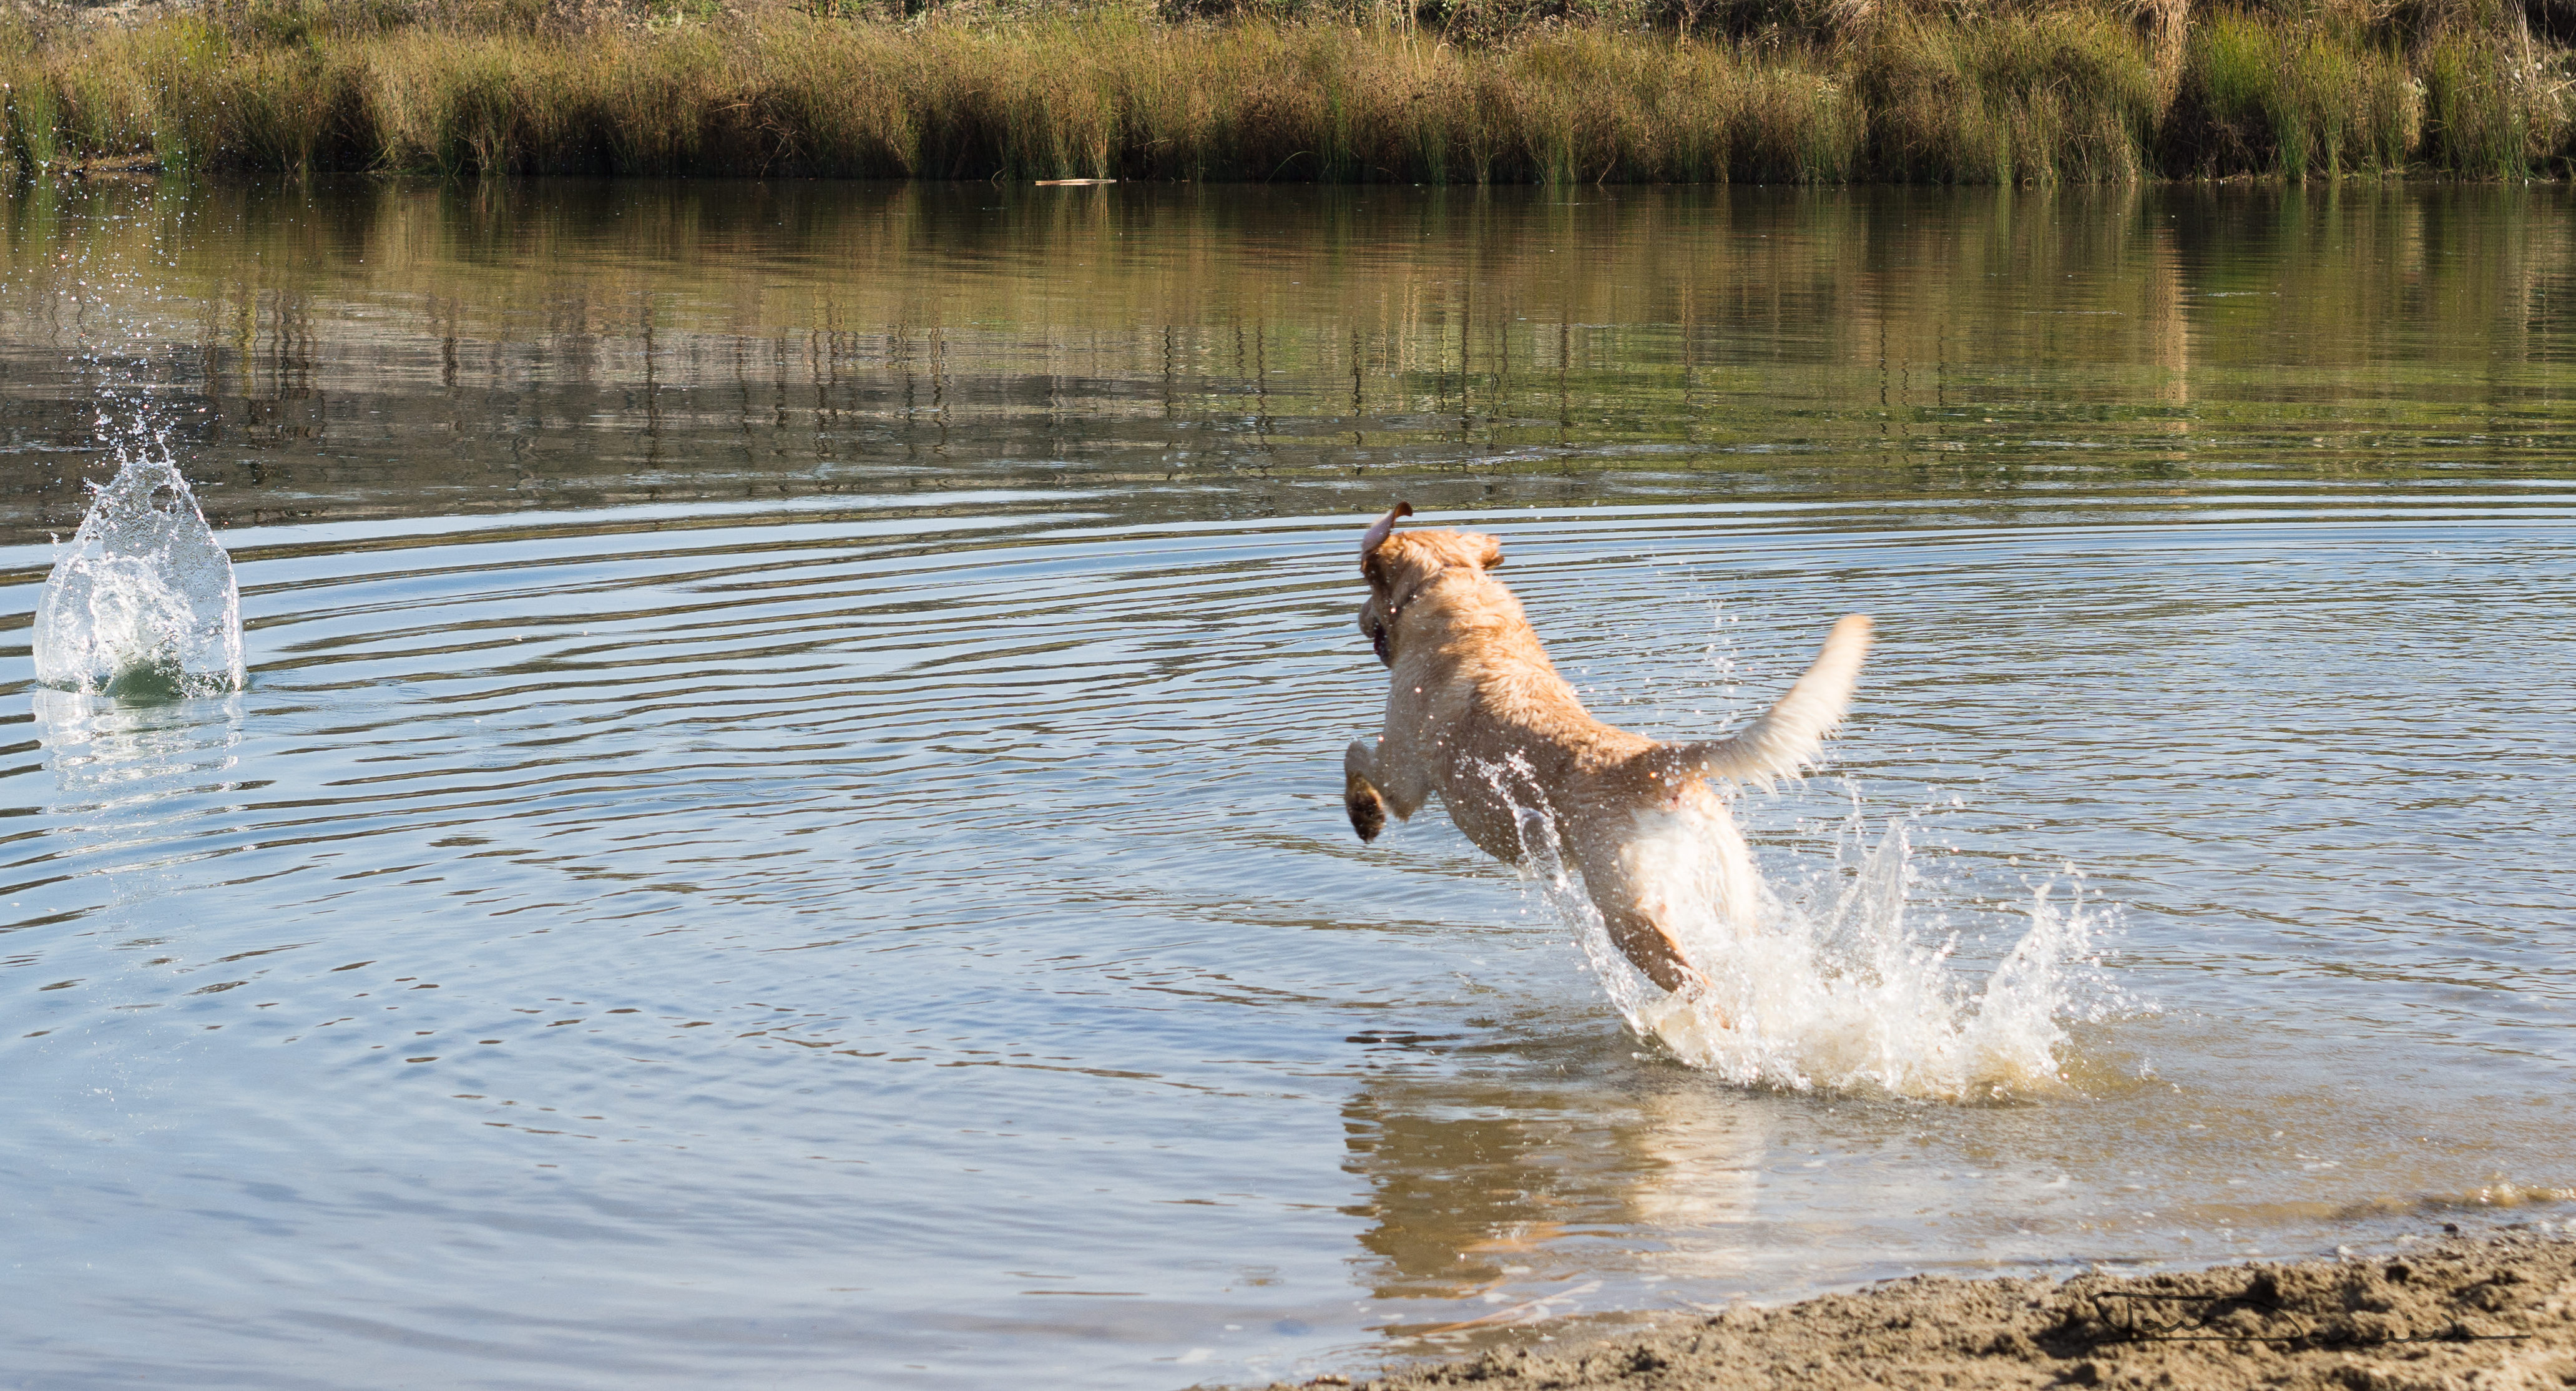 Dog chasing ball into the water.